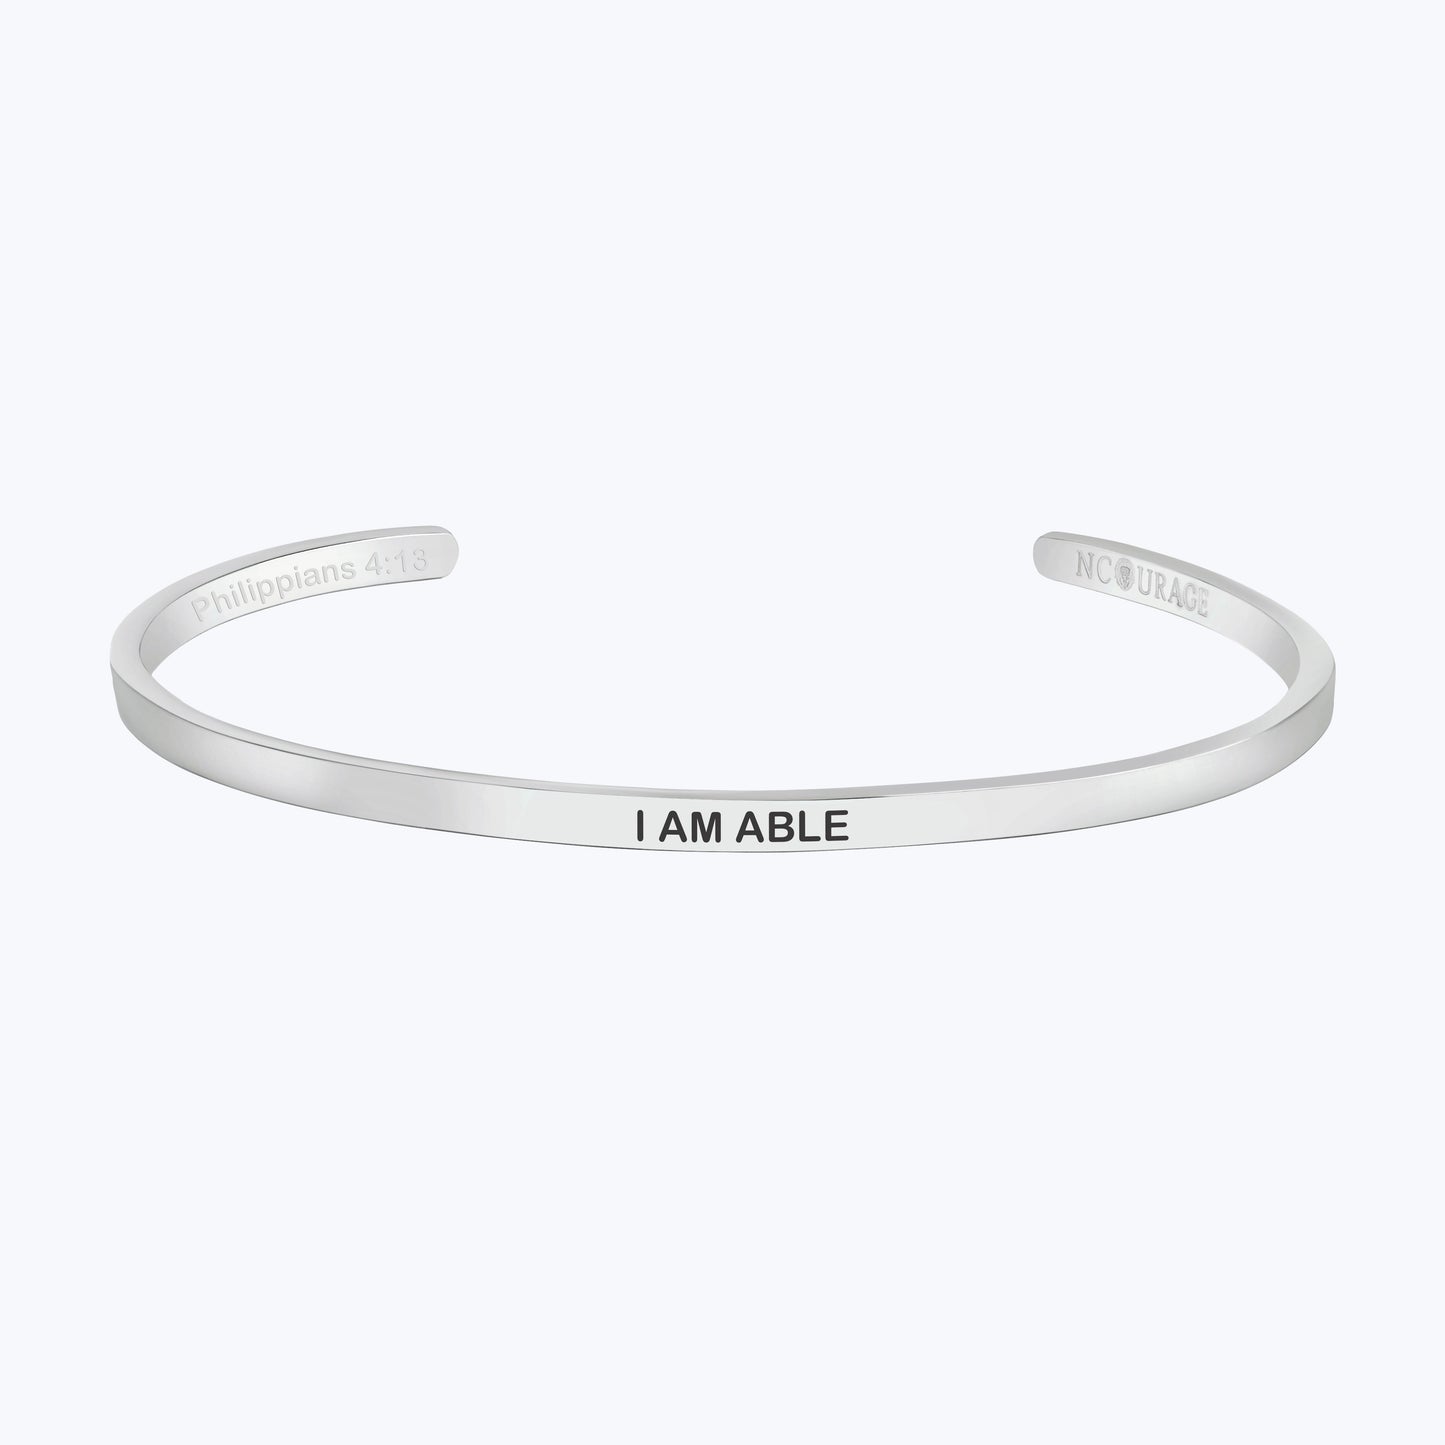 I AM ABLE - NCOURAGE Bands and Bracelets